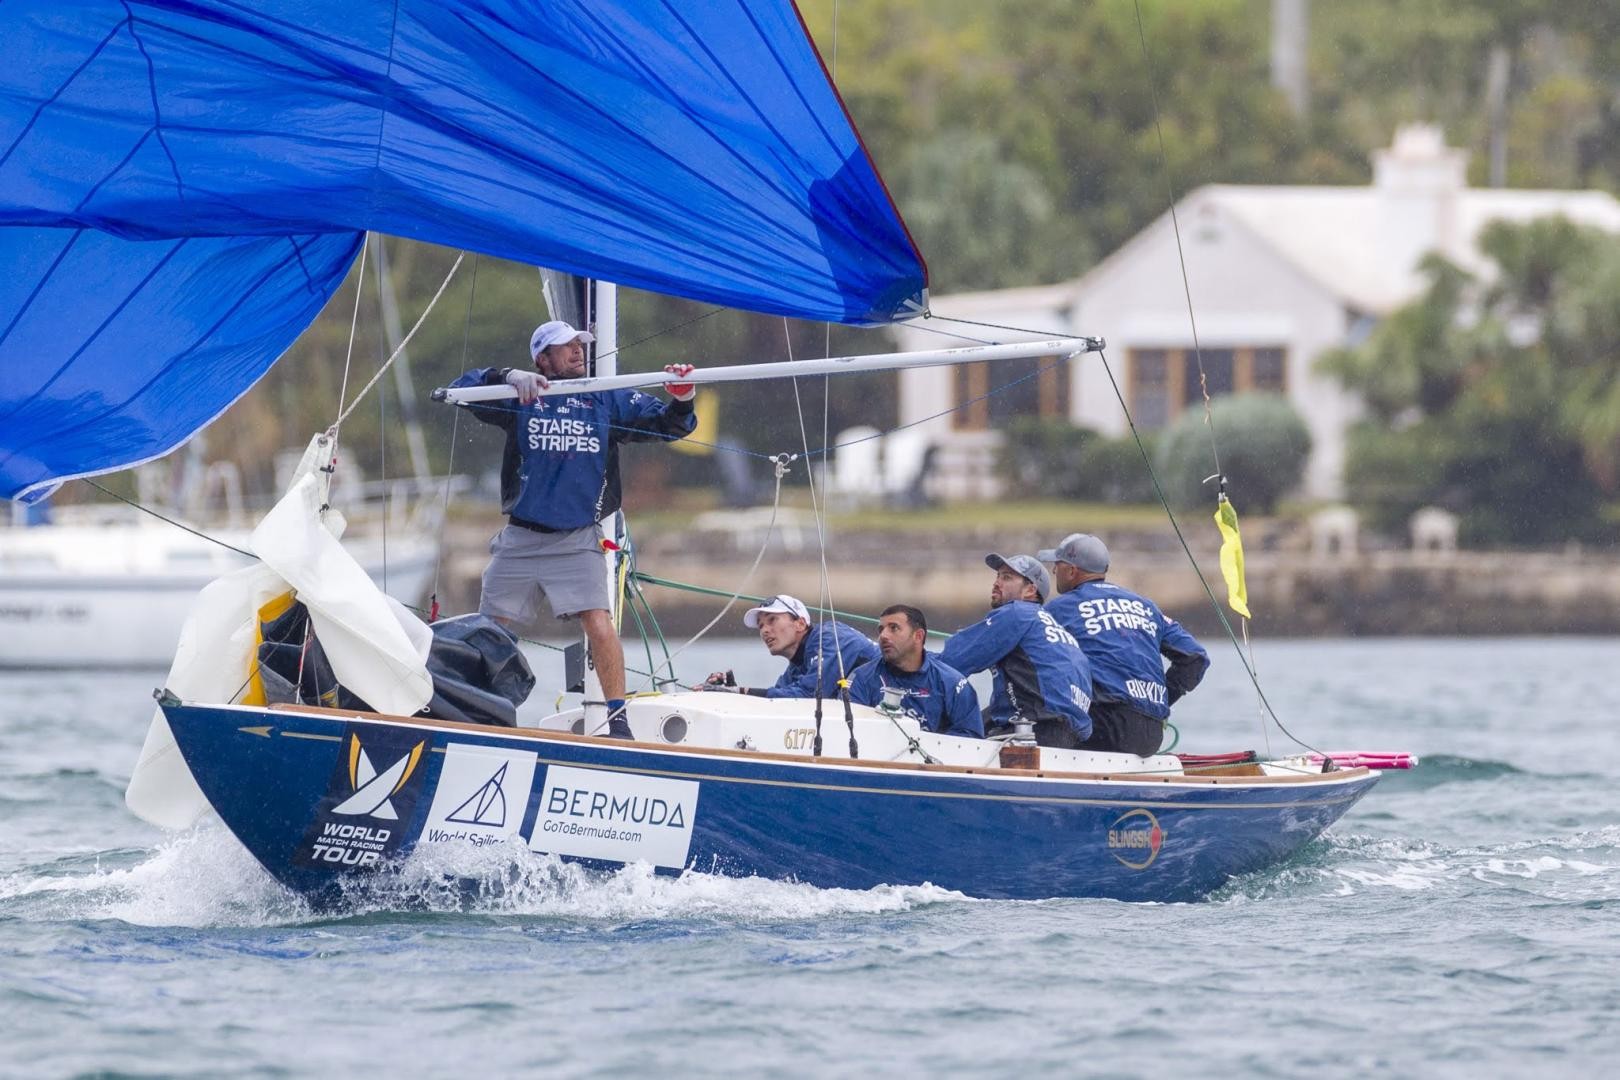 Crews come out swinging at 70th Bermuda Gold Cup, 2020 Open Match Racing Worlds